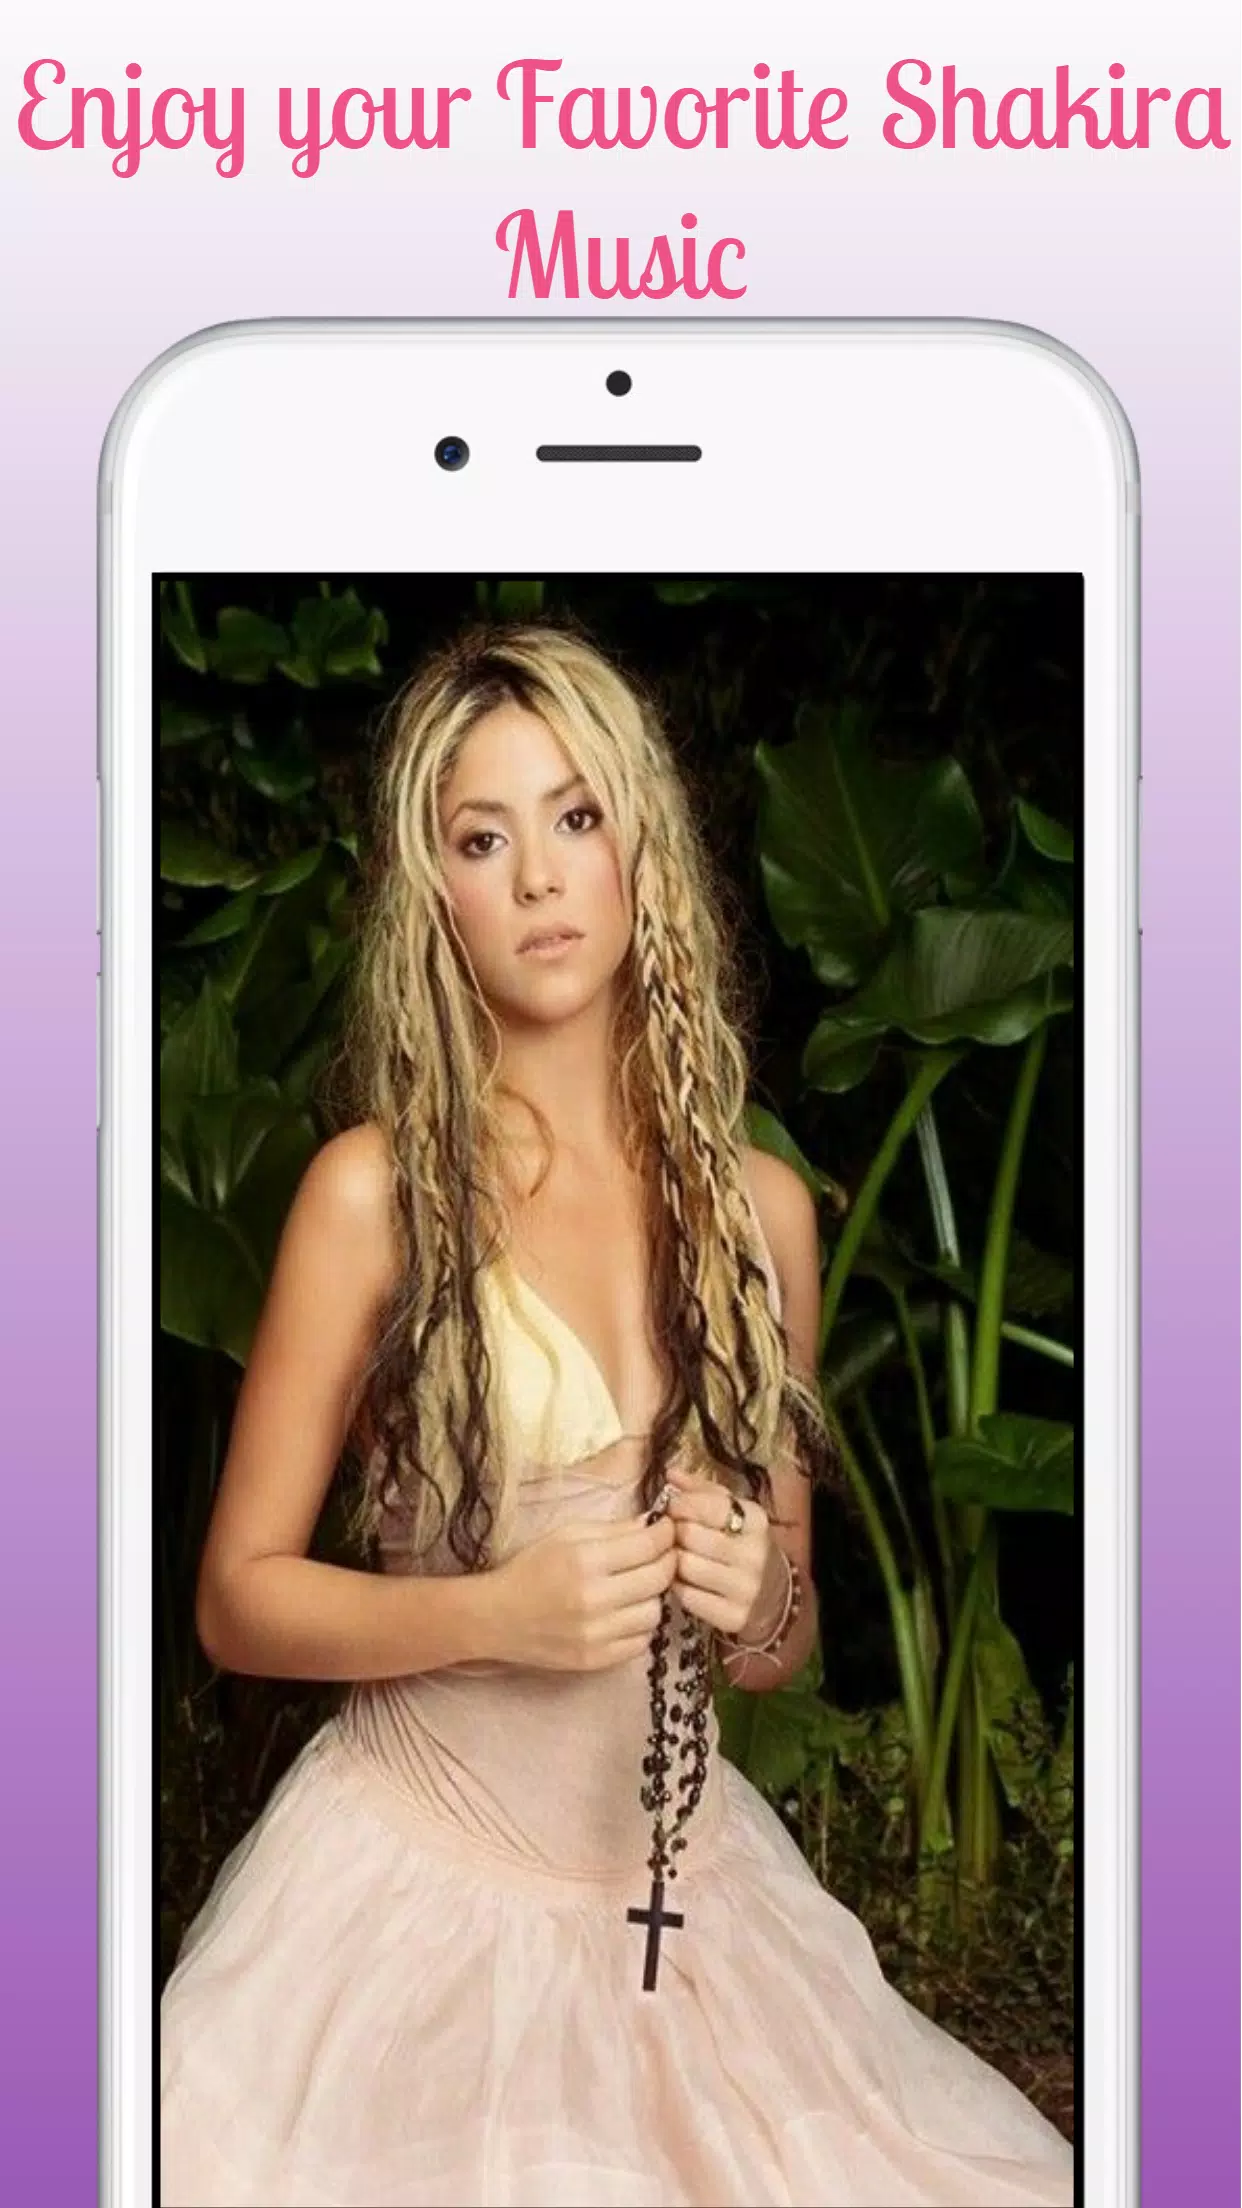 Shakira Music MP3 Free Offline No Wifi Connection APK for Android Download